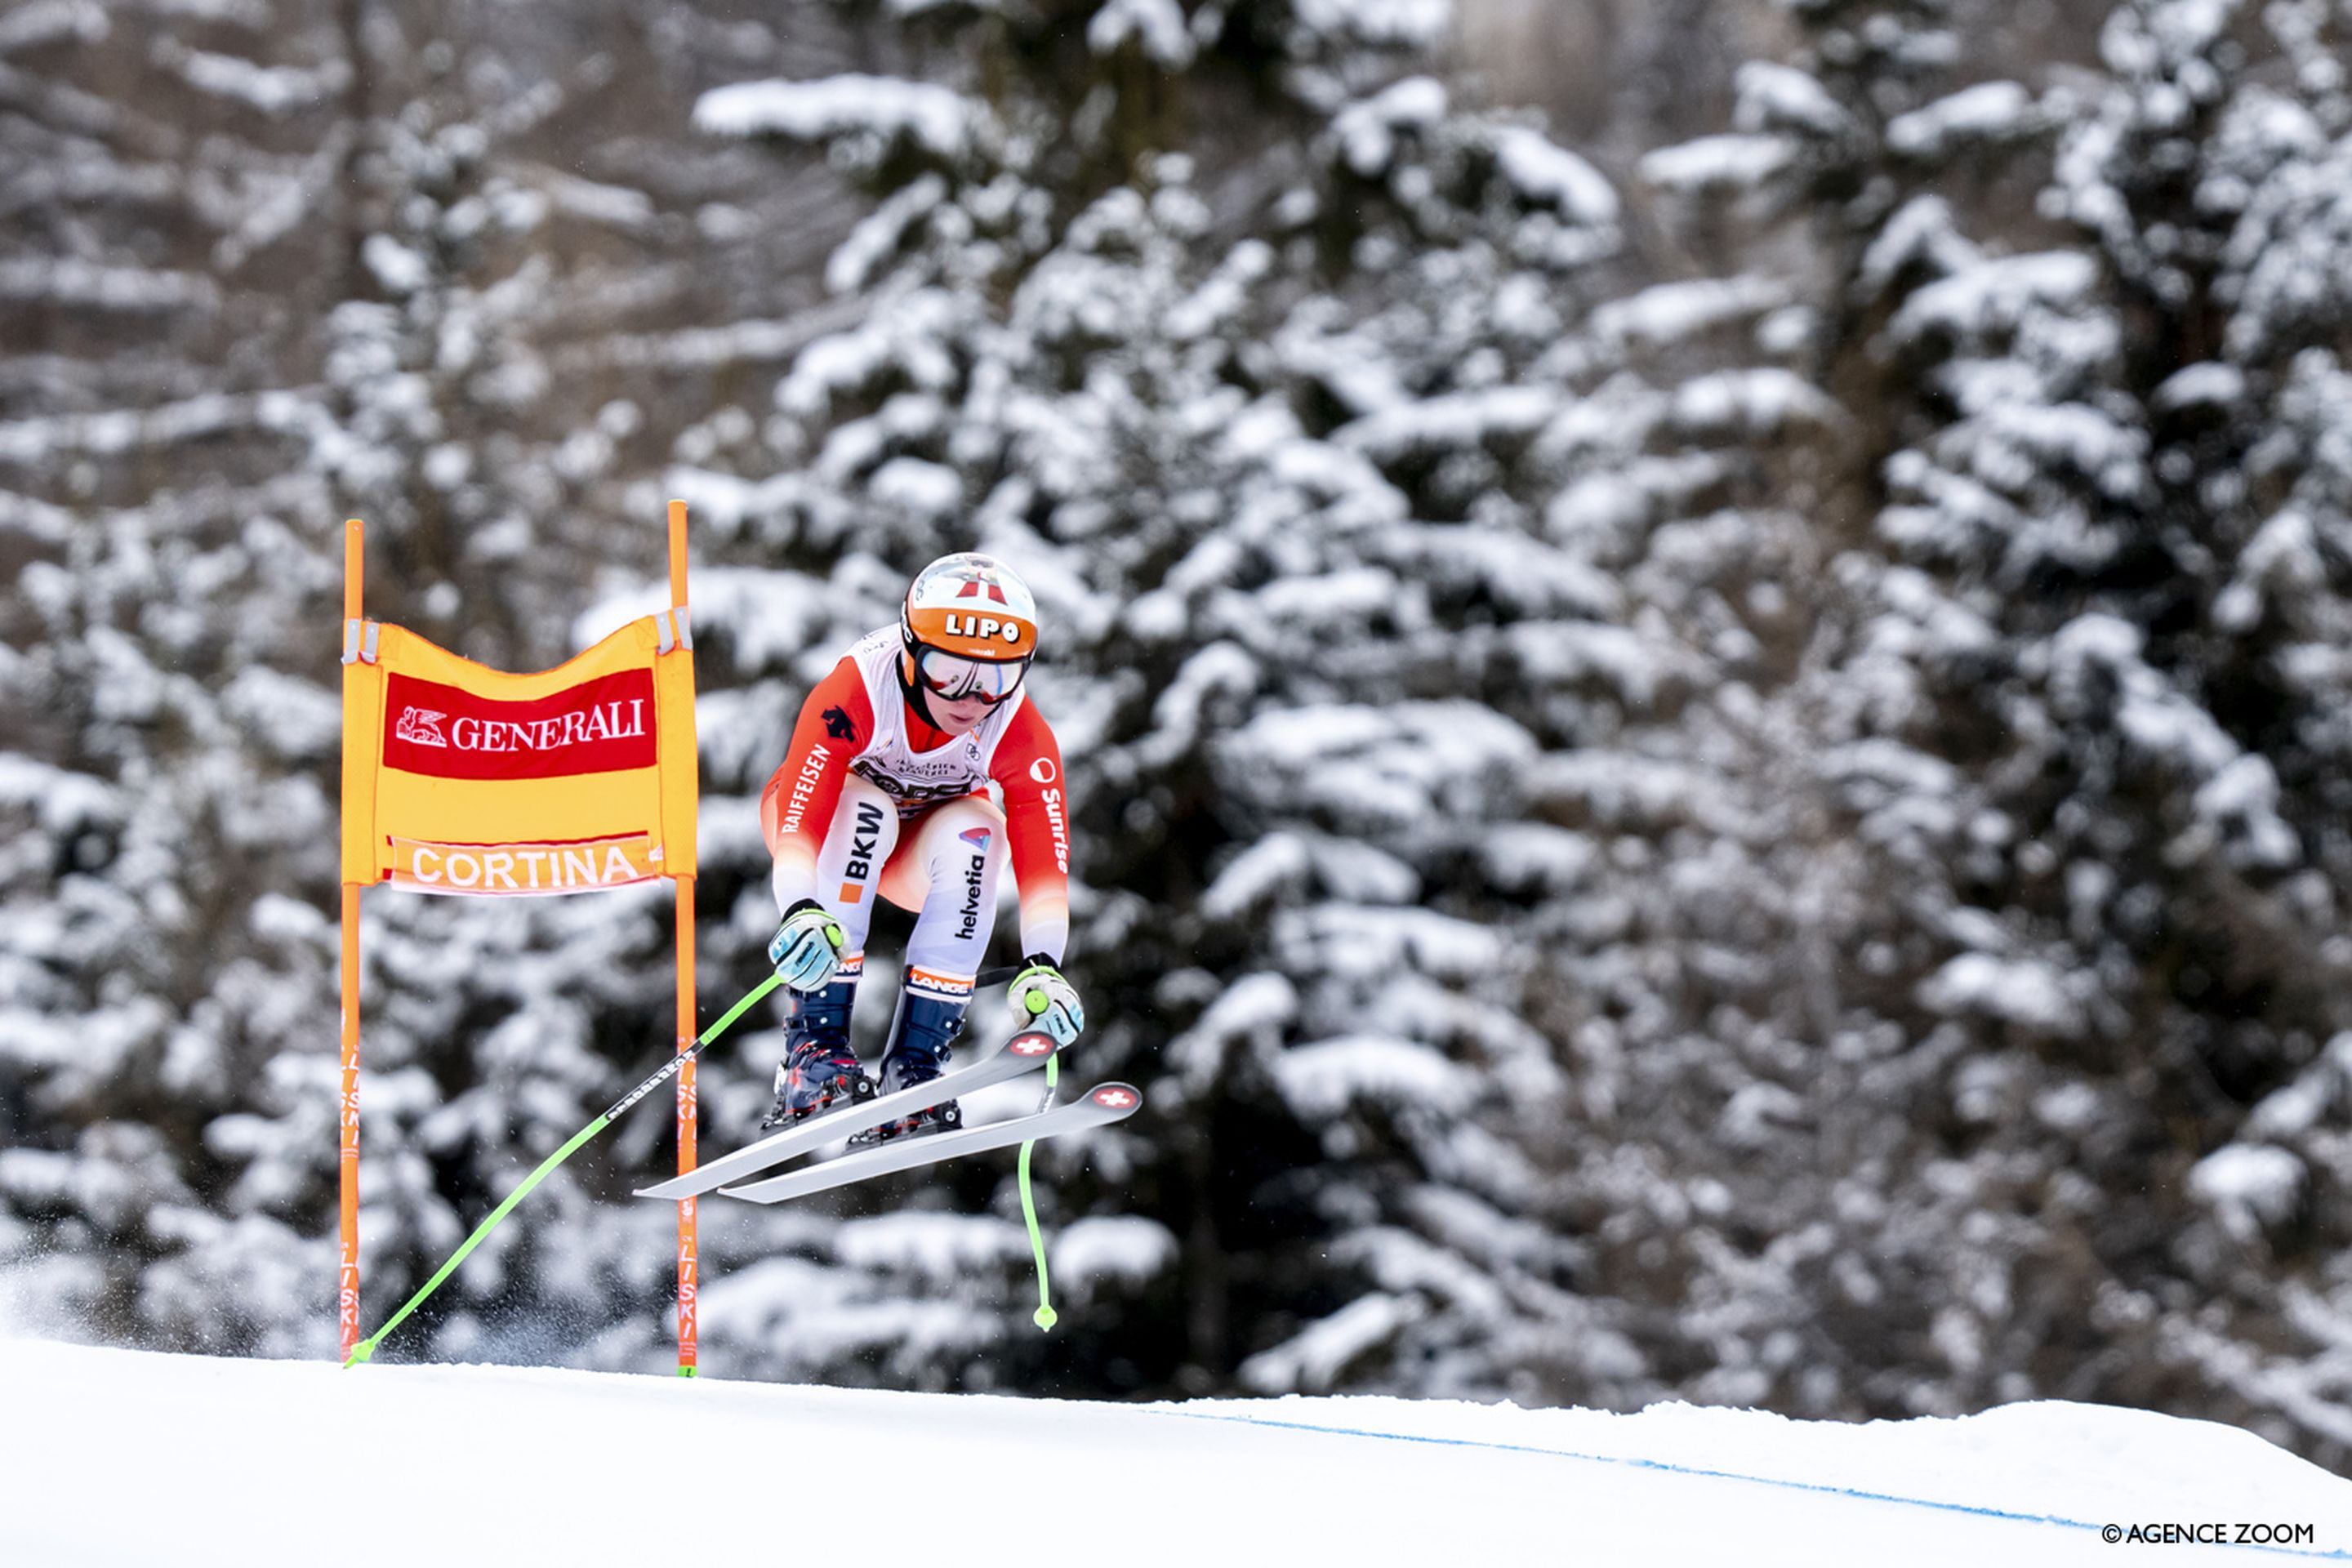 European Cup women's overall leader Janine Schmitt (SUI) competing in a World Cup downhill race in Cortina d'Ampezzo